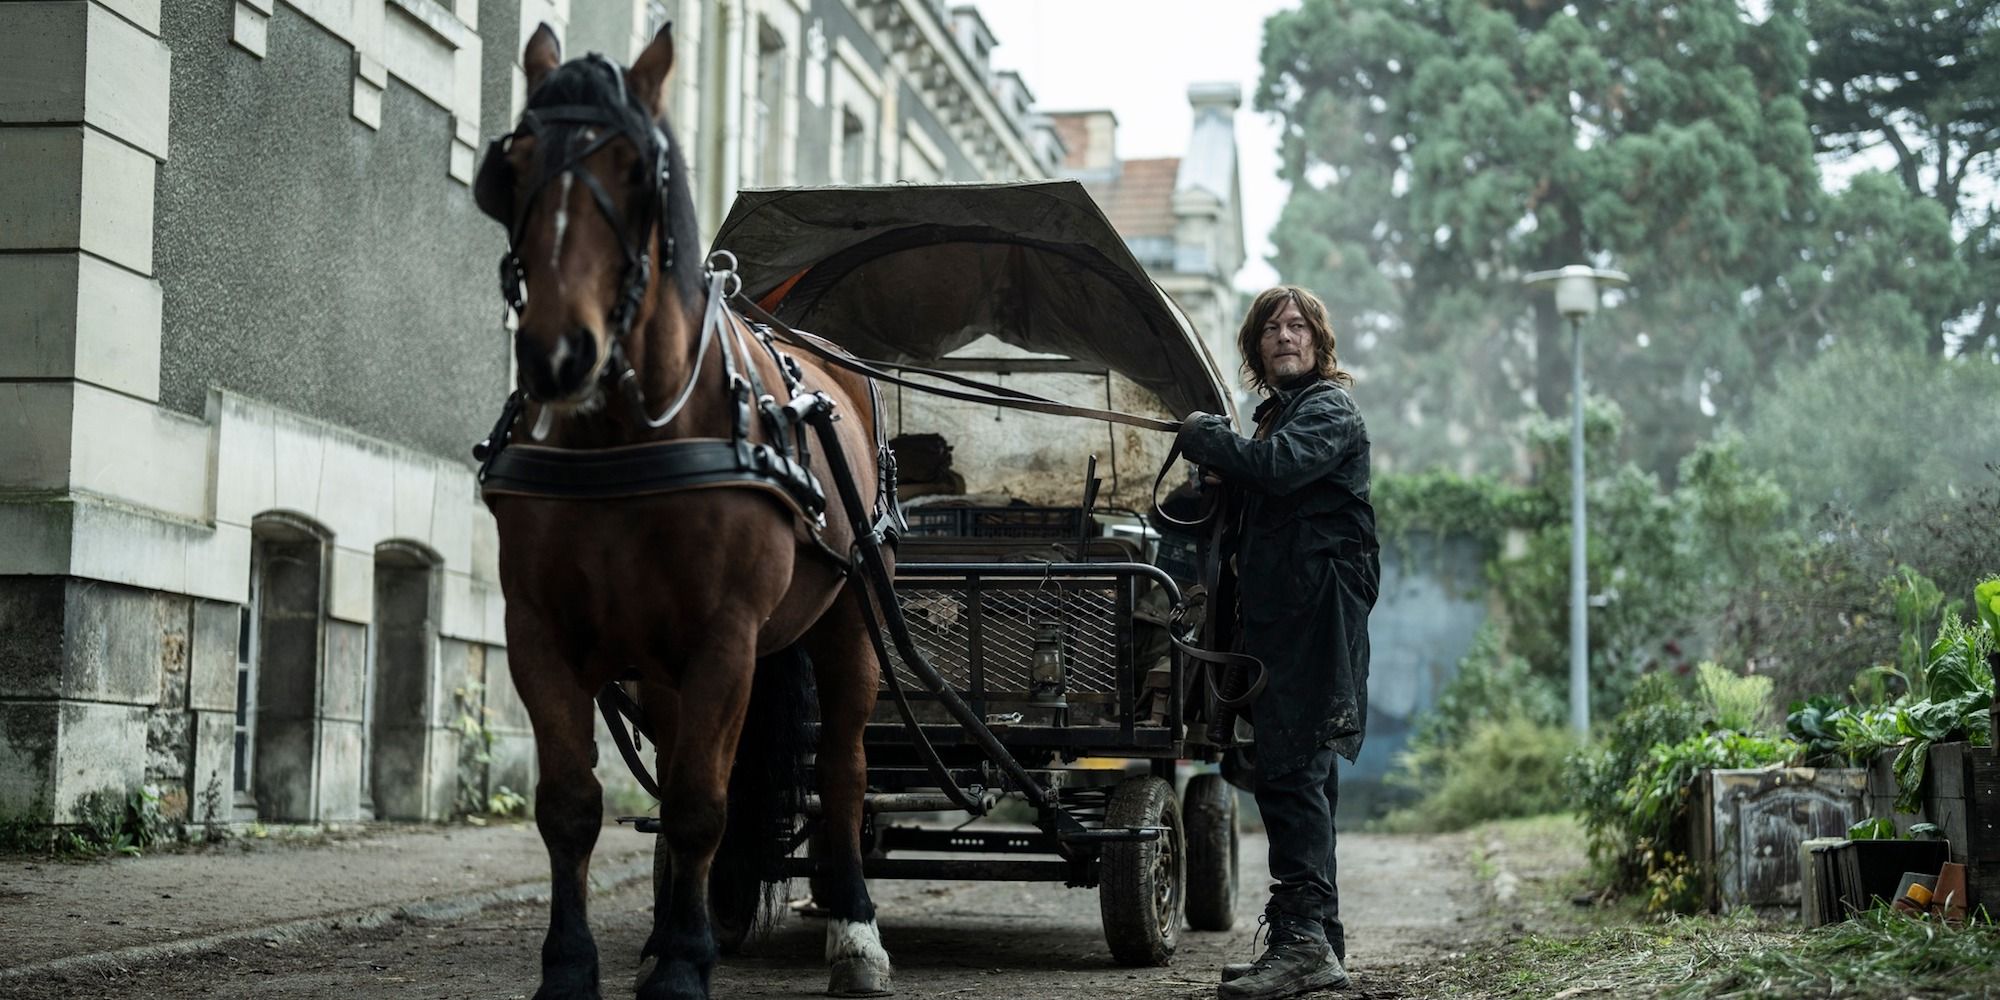 Norman Reedus as Daryl Dixon with a Horse Drawn Carriage in The Walking Dead Daryl Dixon